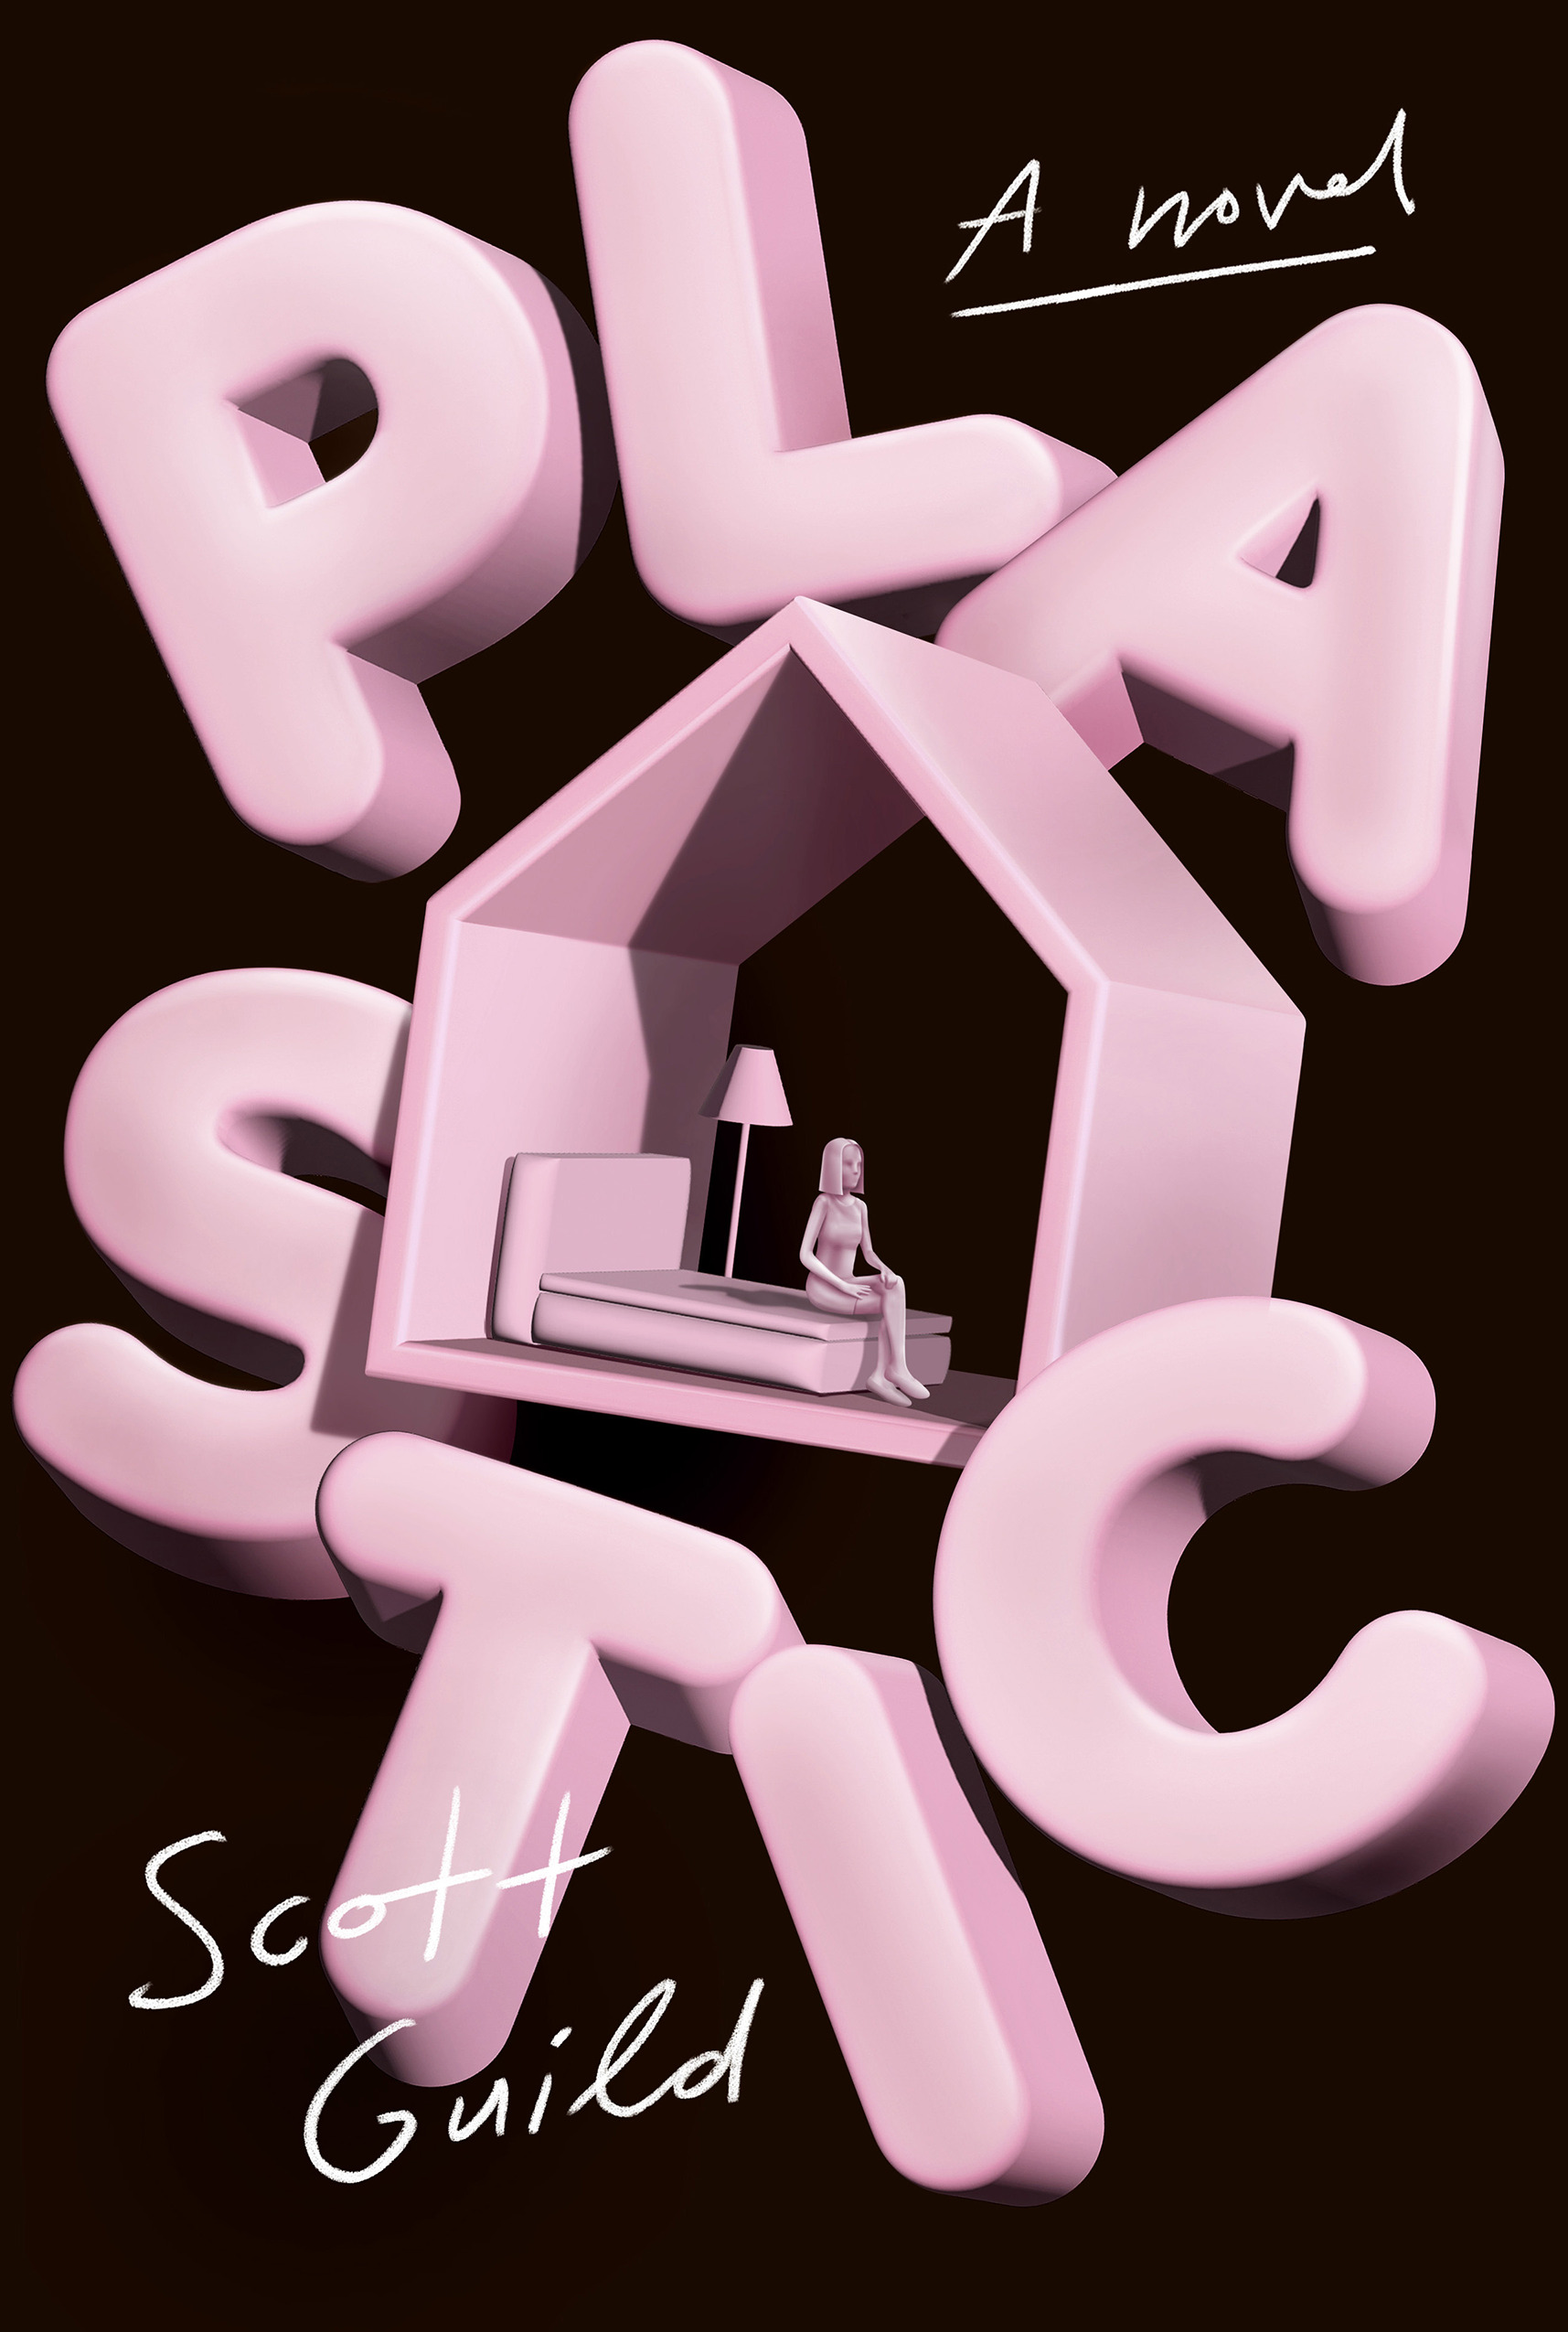 Scott Guild breathes new life into flexible figurines with his debut novel, ‘Plastic’